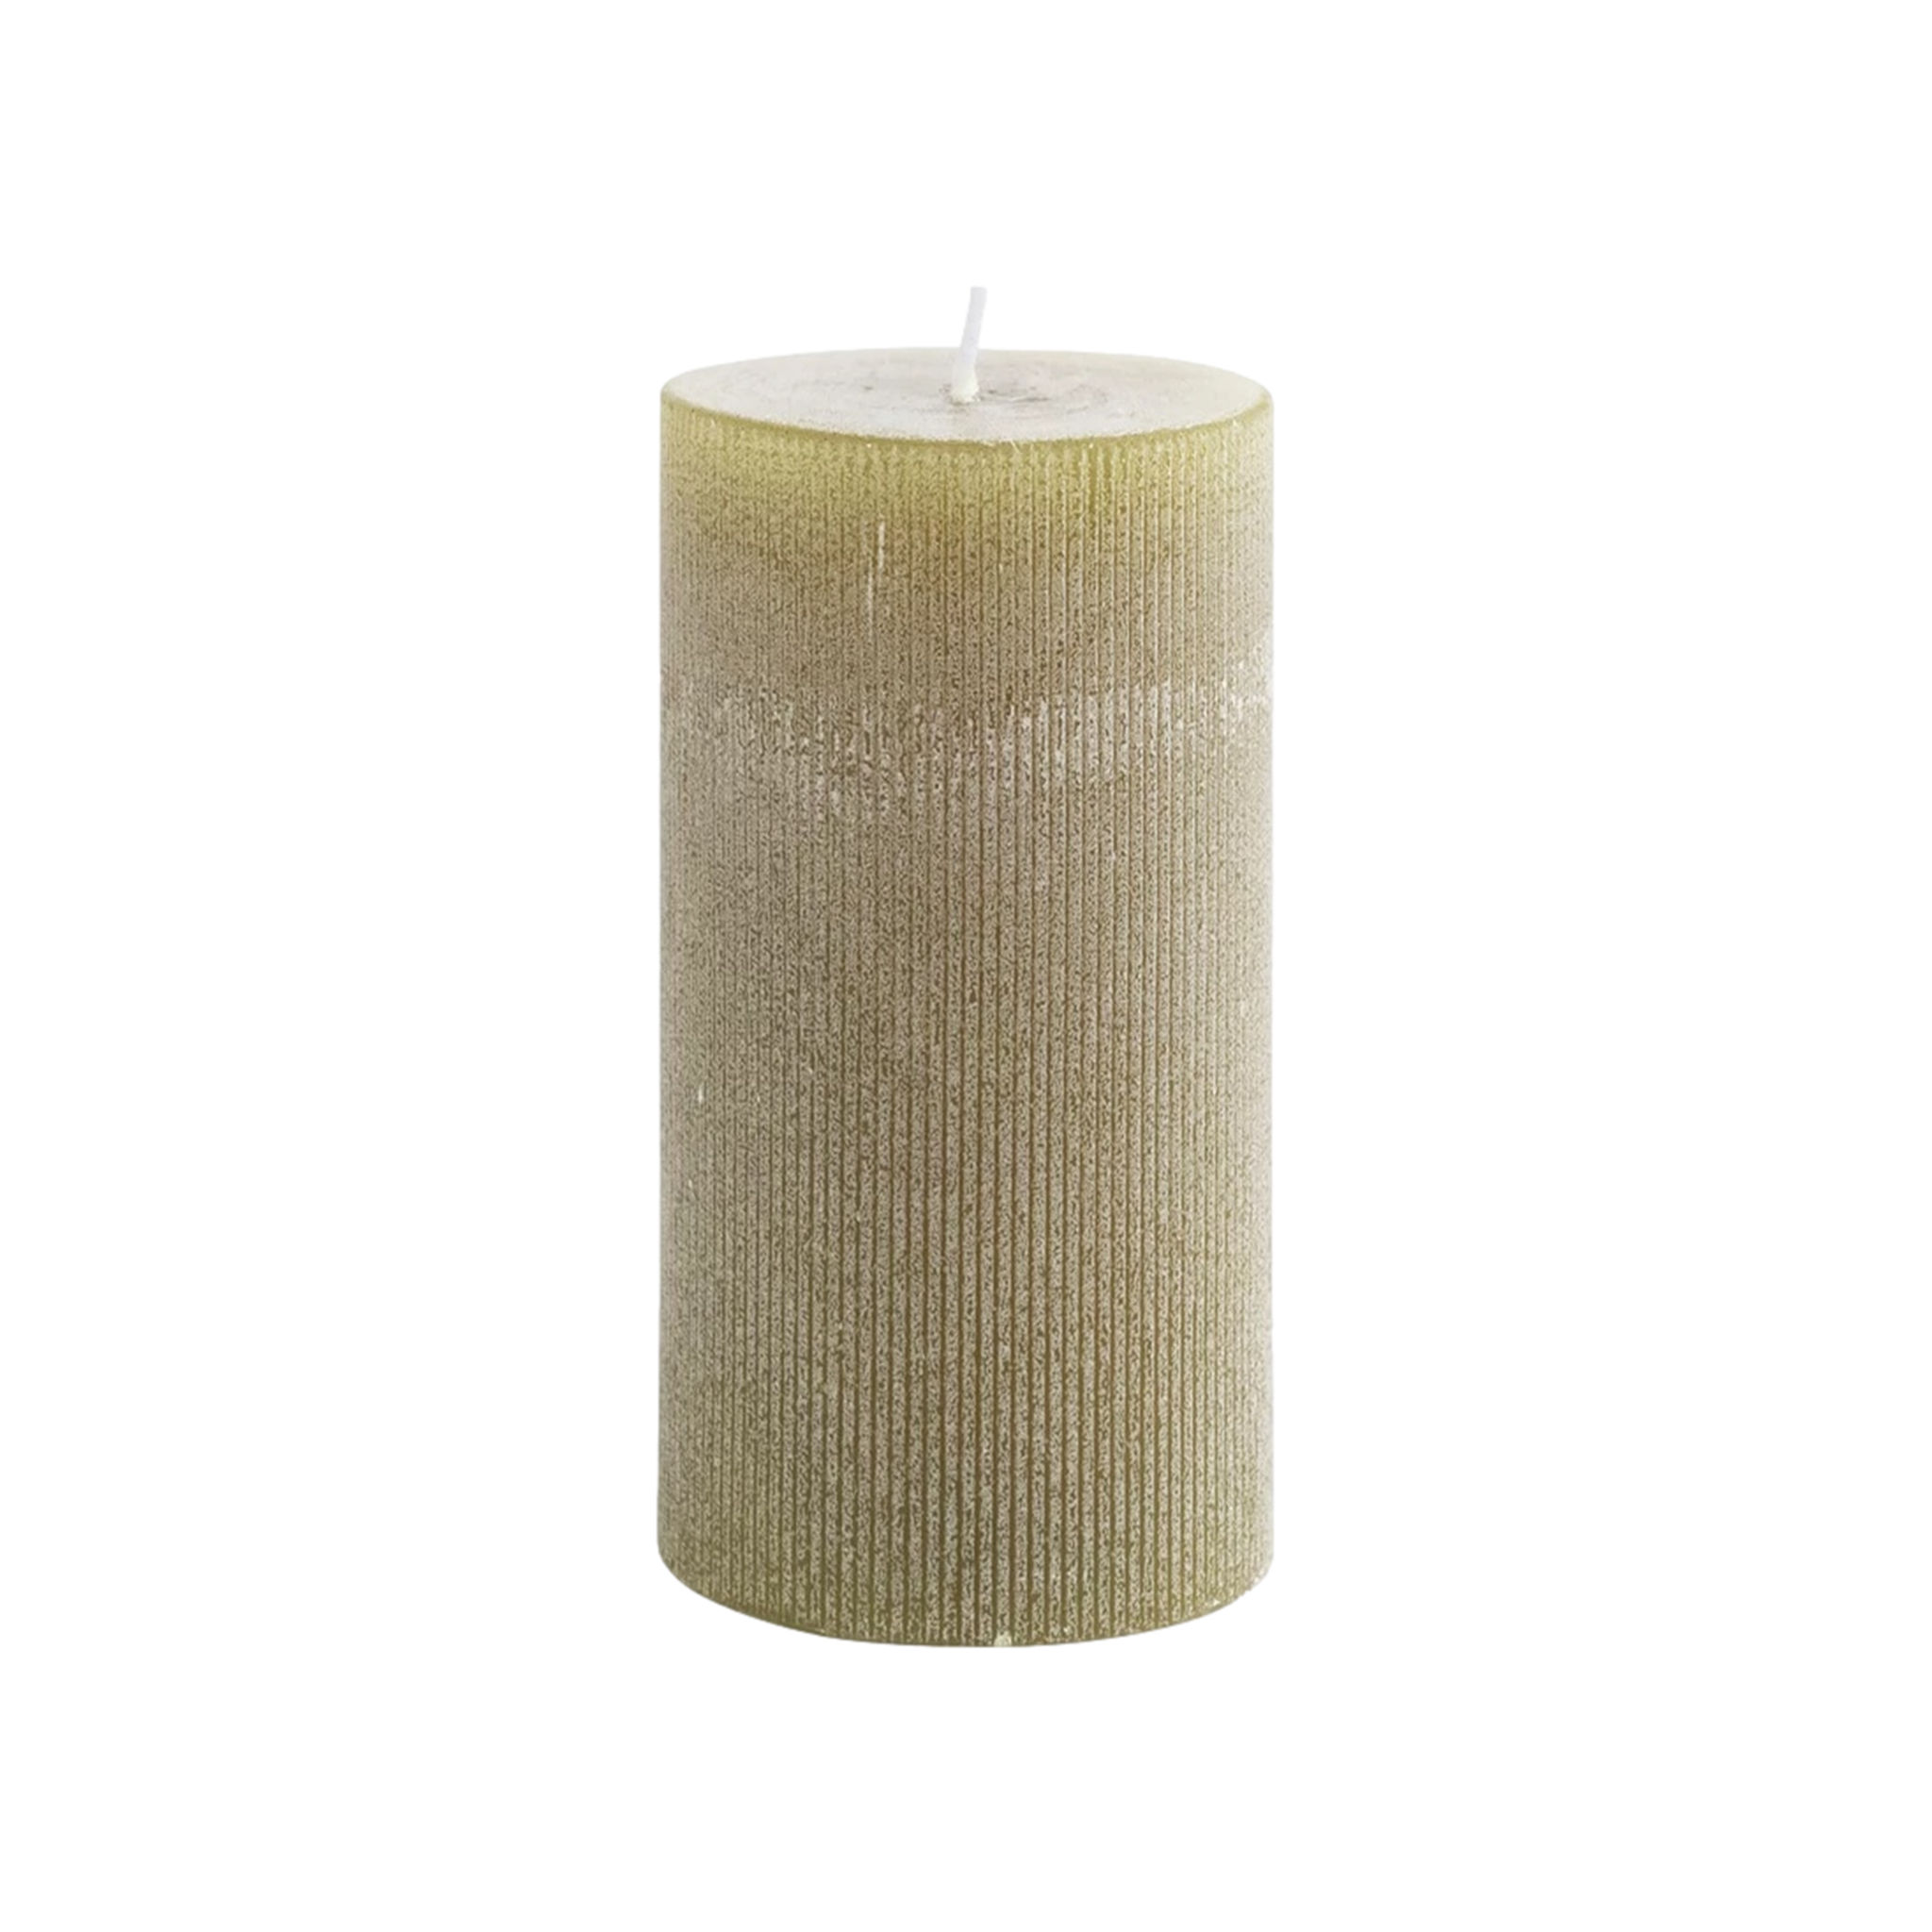 Pleated Pillar Candle in Olive